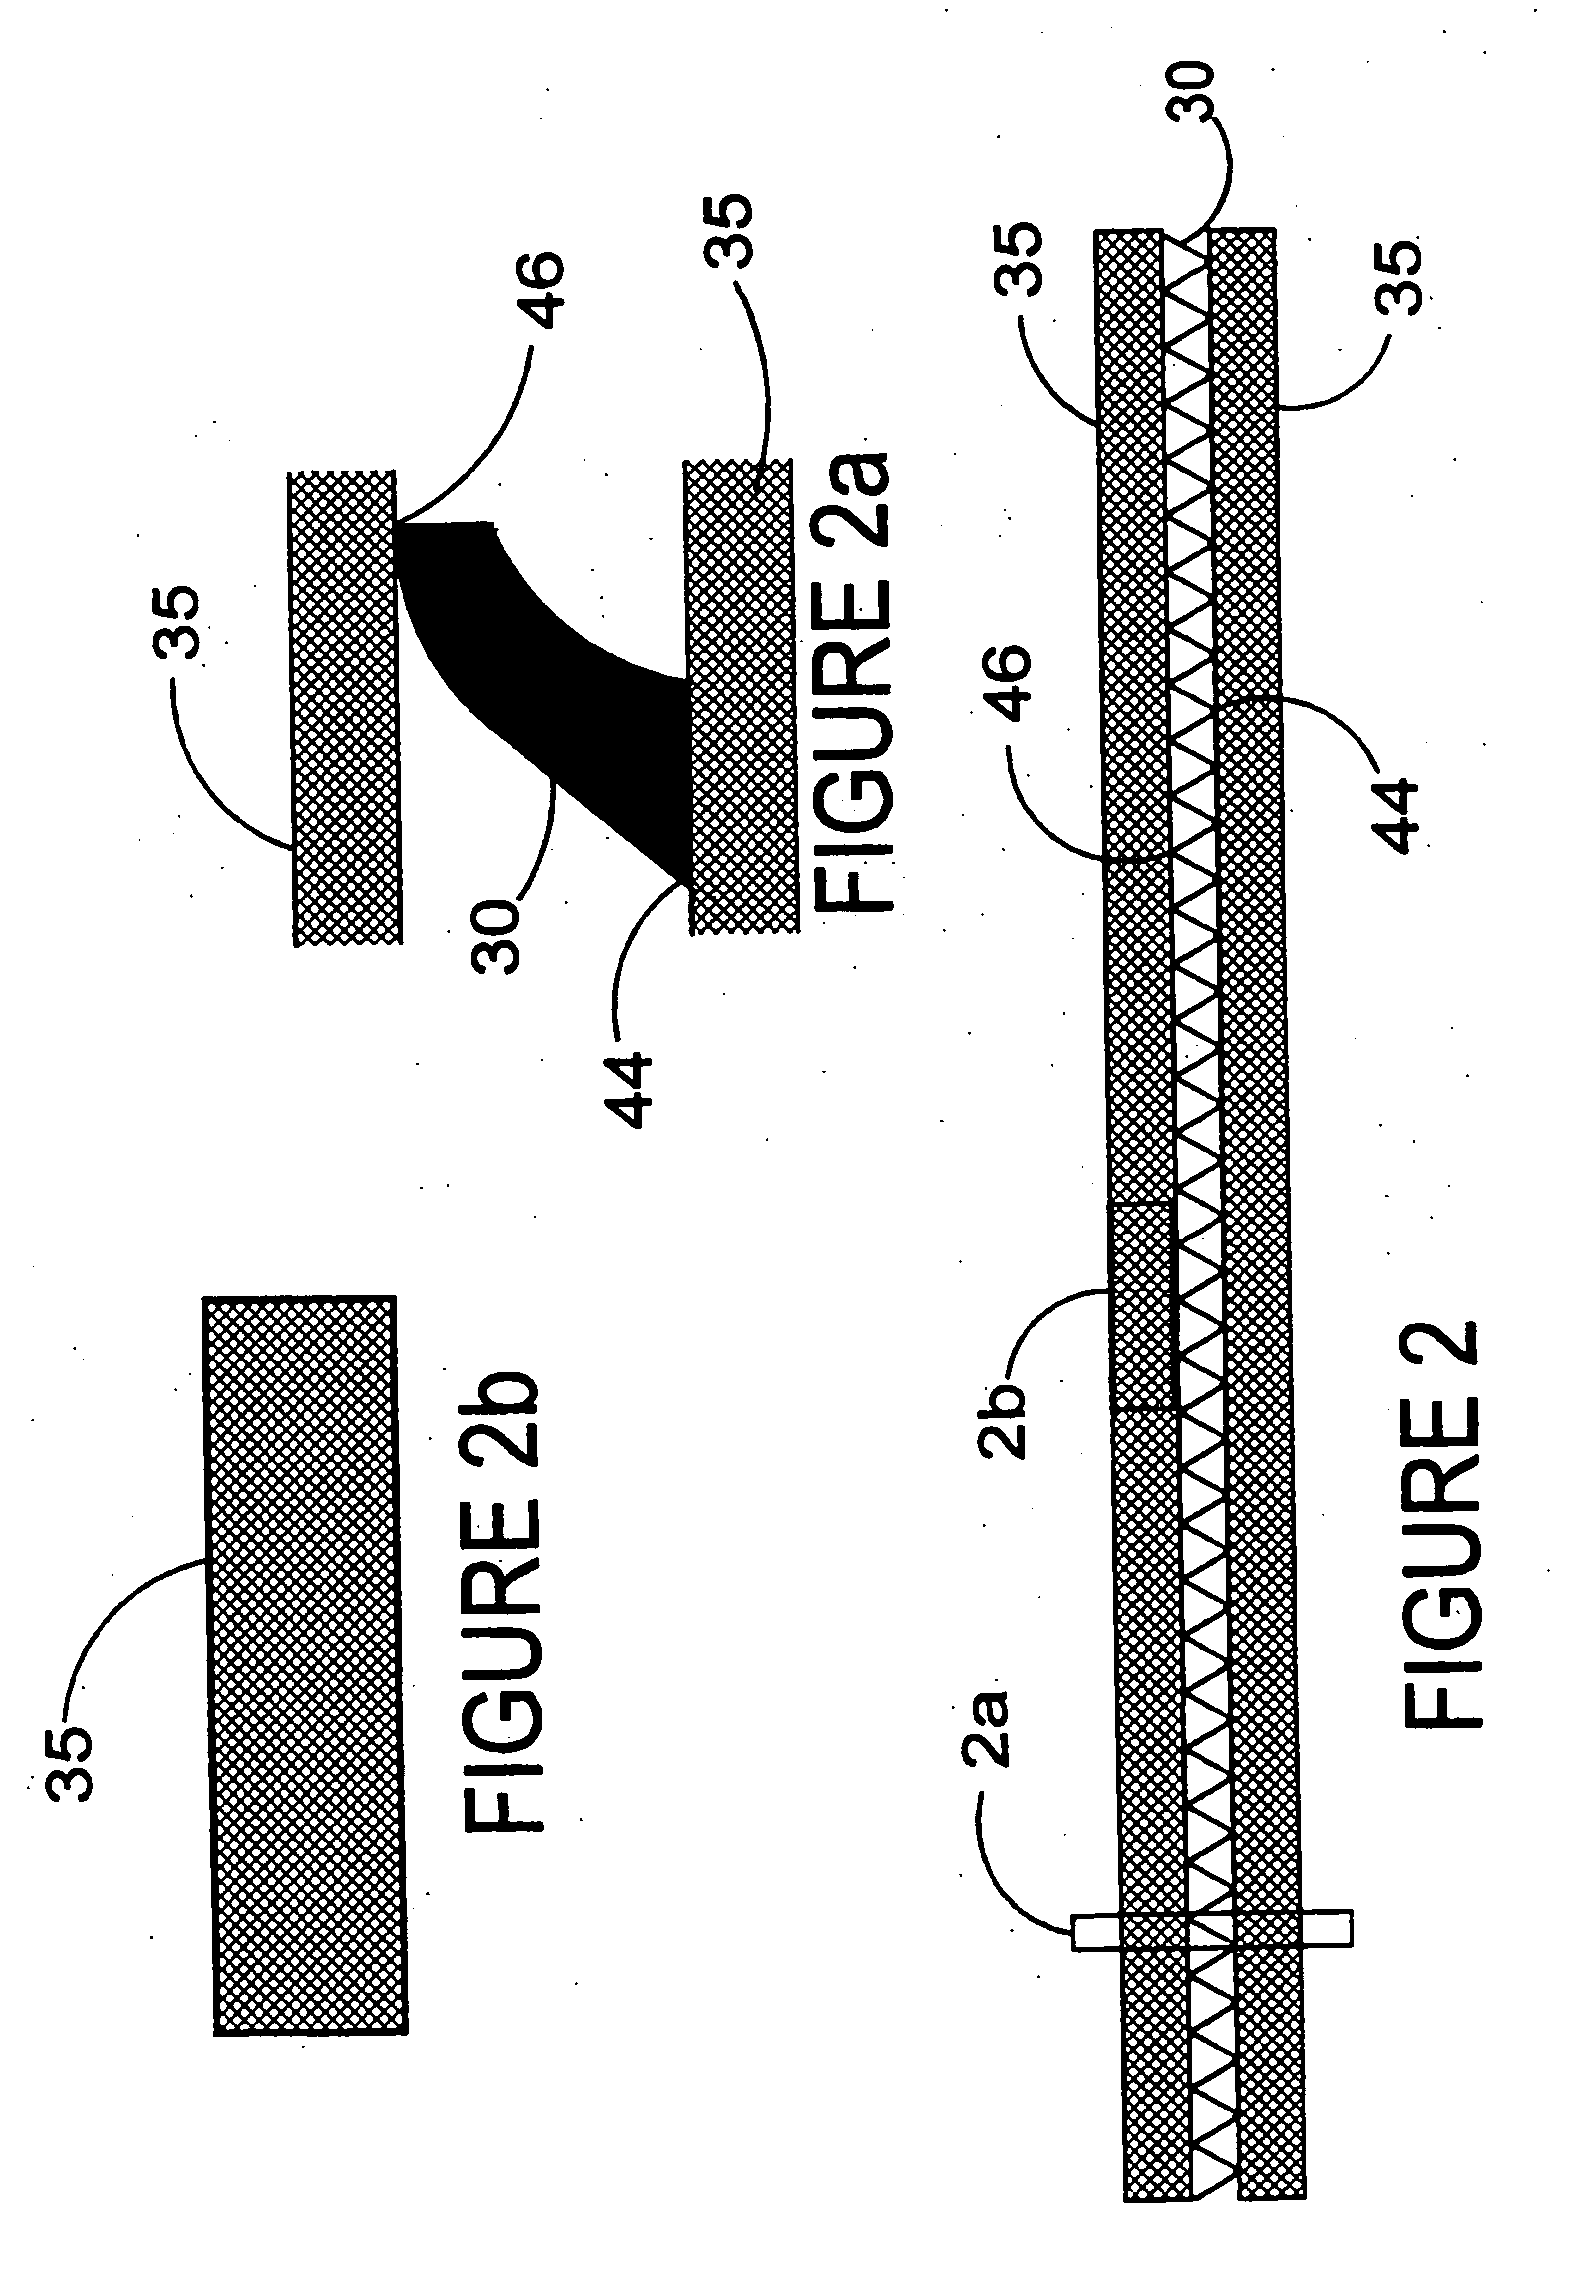 Packaging material for electrostatic sensitive devices